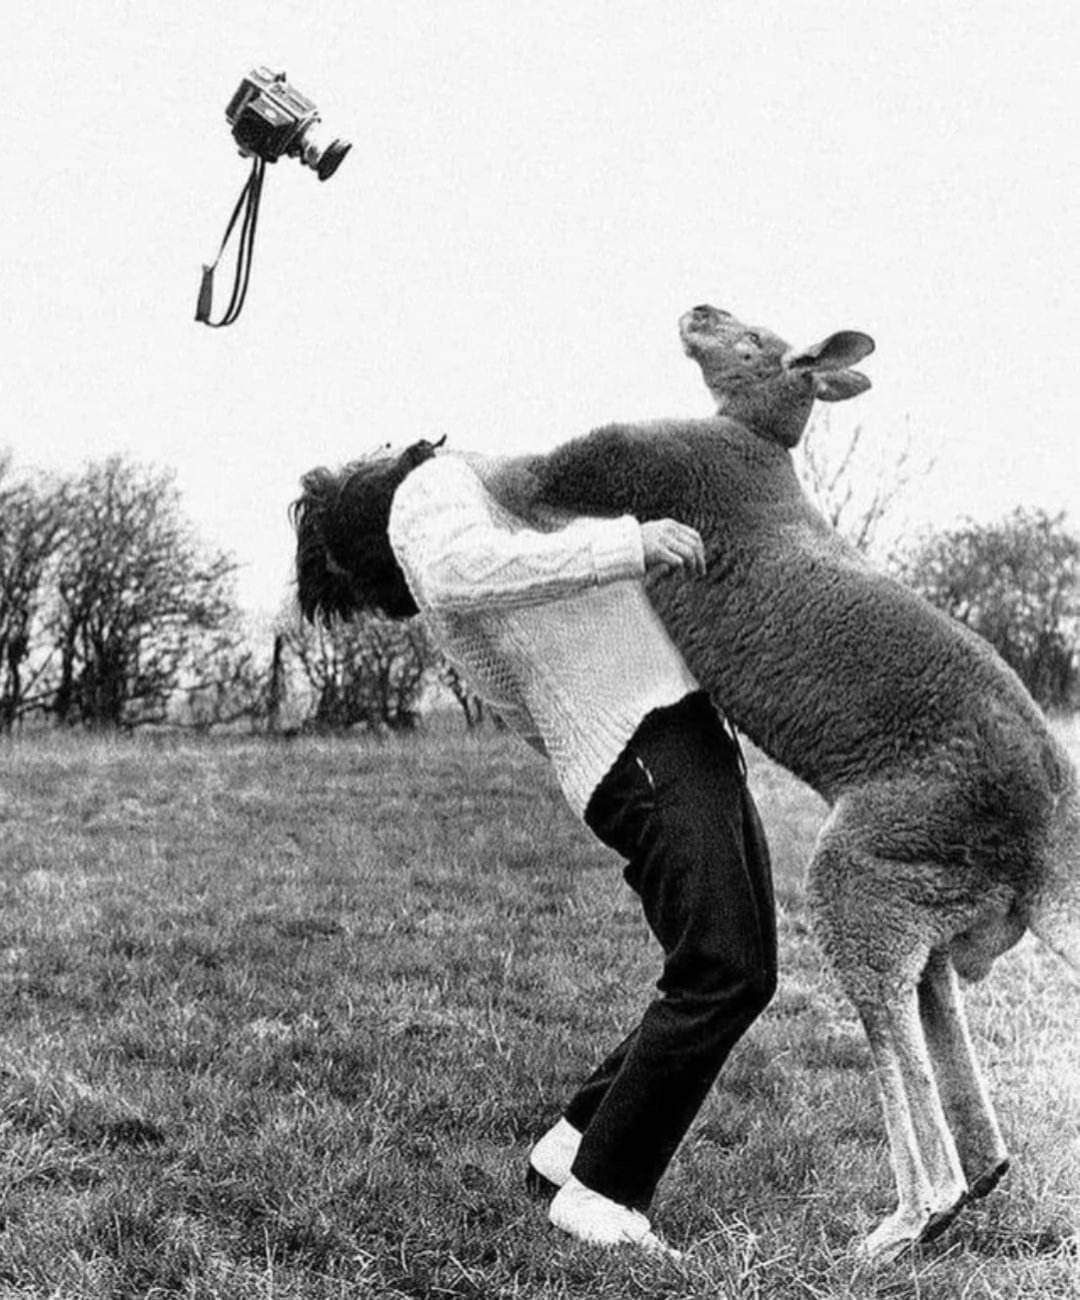 Andrew the giant, the world's first invisible photographer took a picture of the final punch in the global human vs kangaroo games in 1963